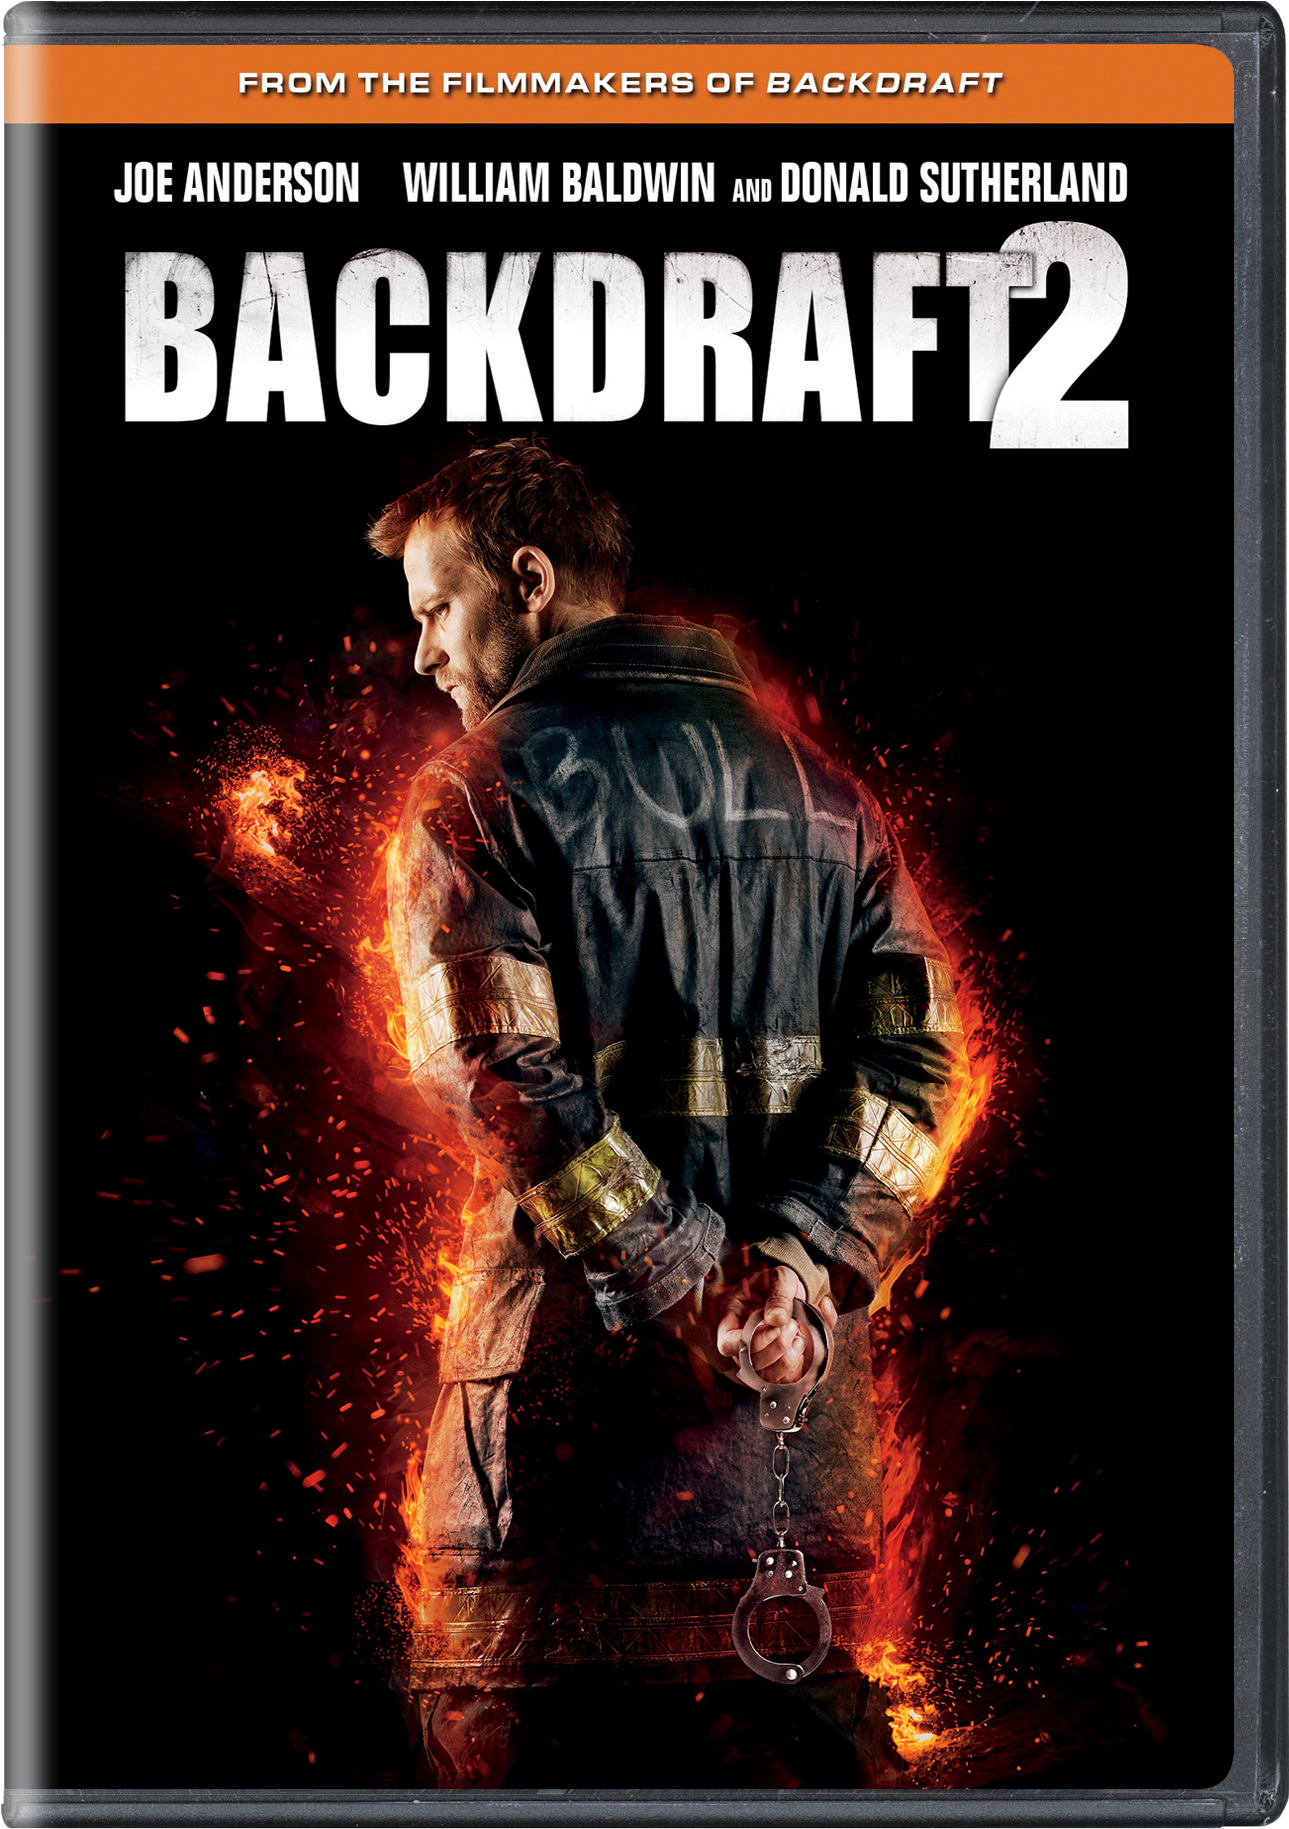 Backdraft 2 - DVD [ 2019 ]  - Action Movies On DVD - Movies On GRUV